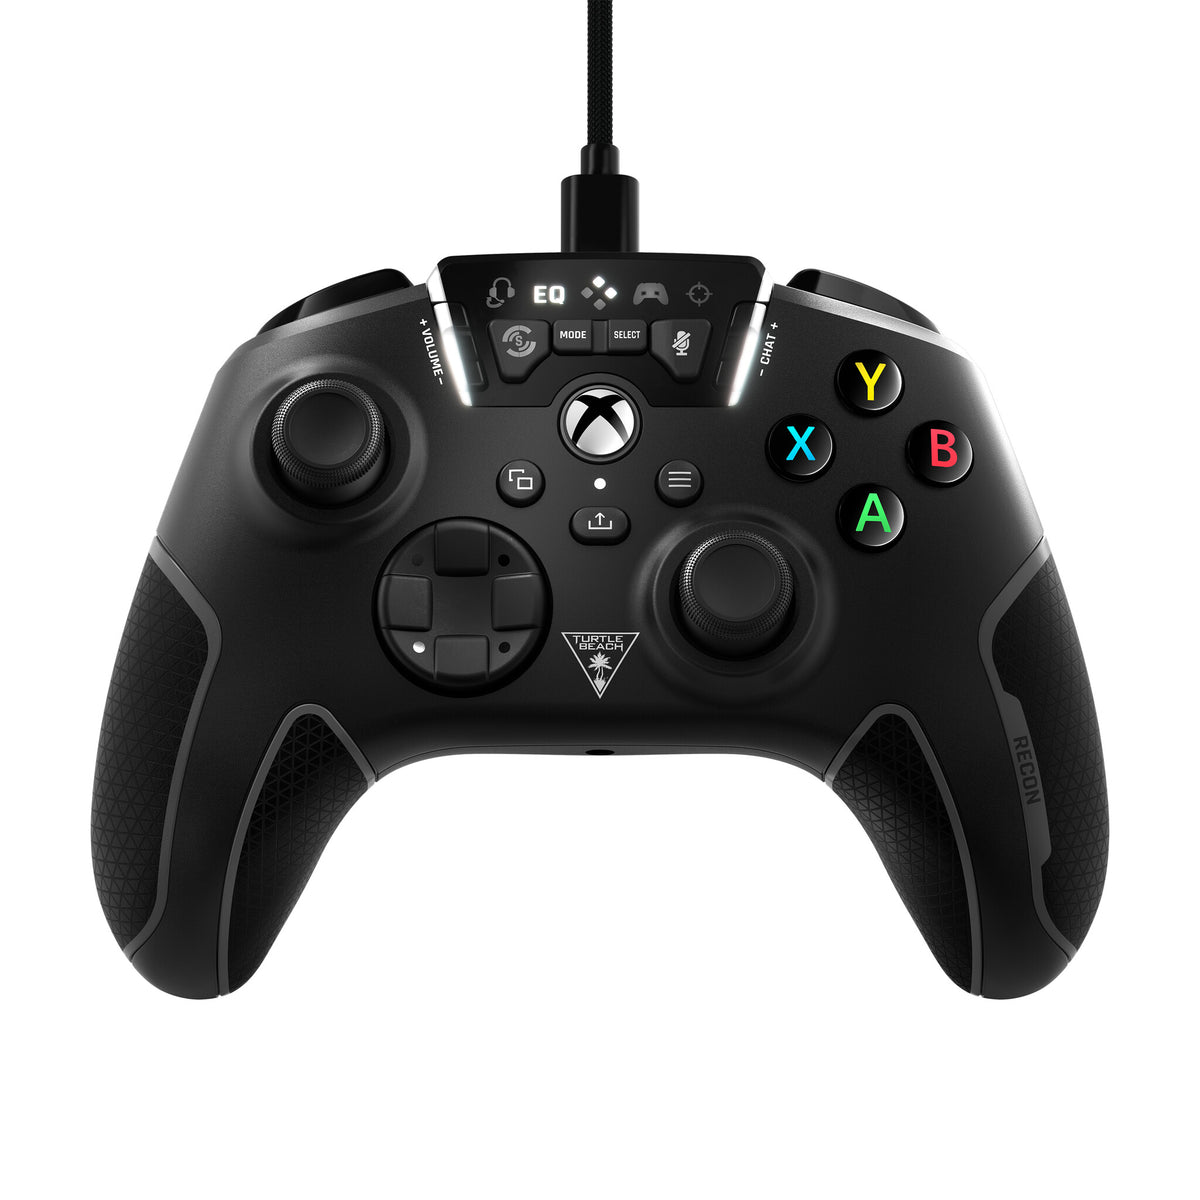 Turtle Beach Recon - USB Wired Gamepad for PC / Xbox Series X|S in Black